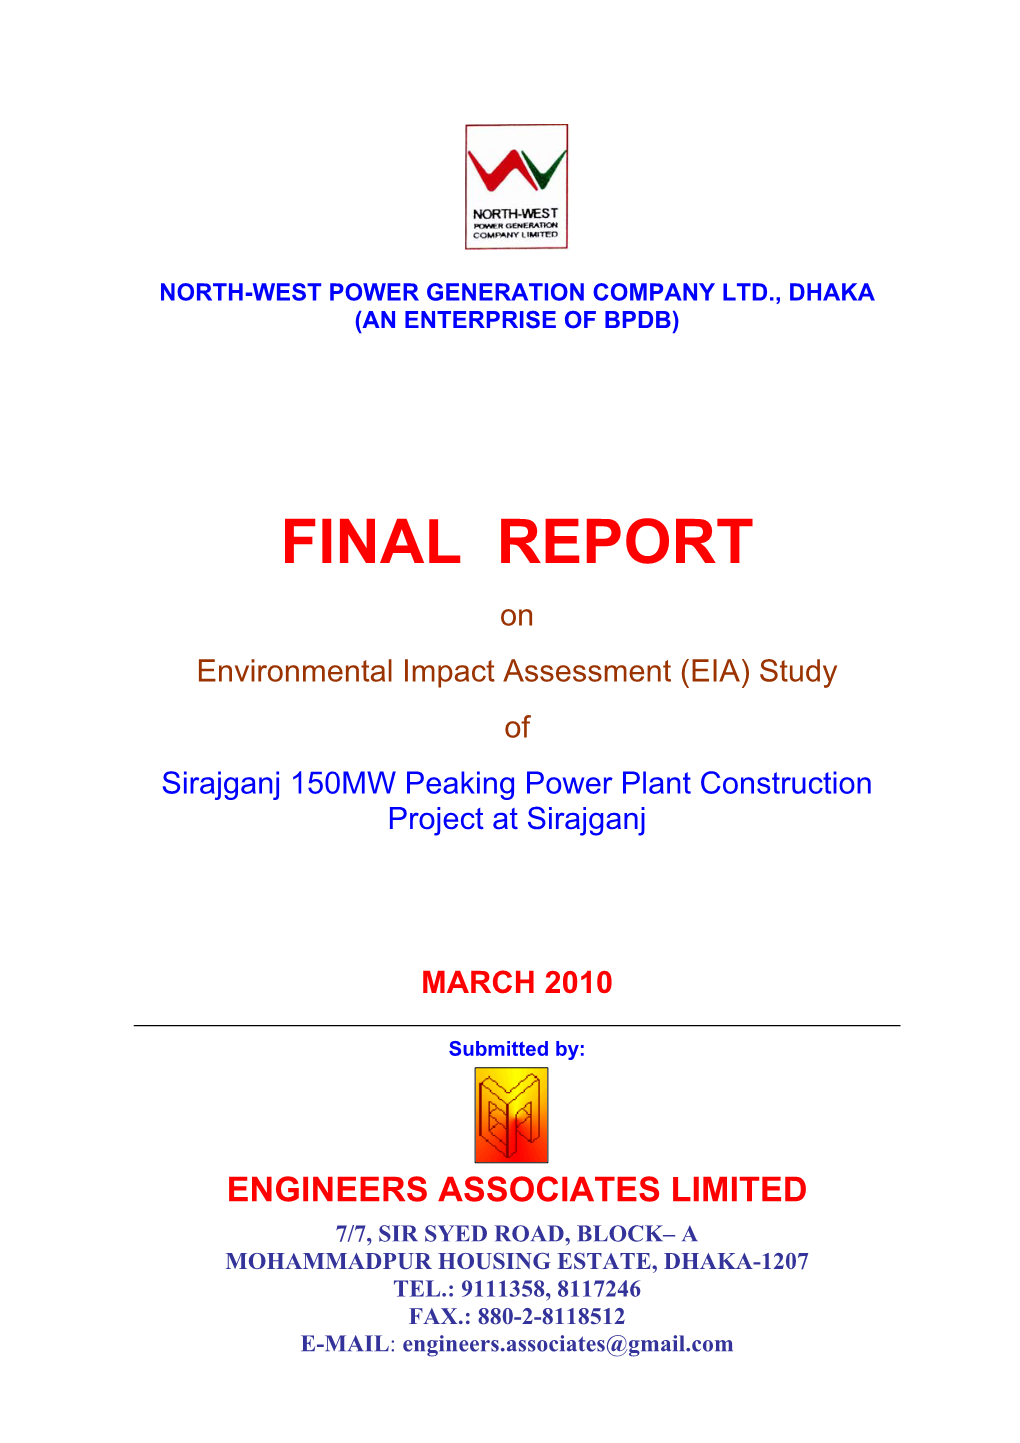 FINAL REPORT on Environmental Impact Assessment (EIA) Study of Sirajganj 150MW Peaking Power Plant Construction Project at Sirajganj